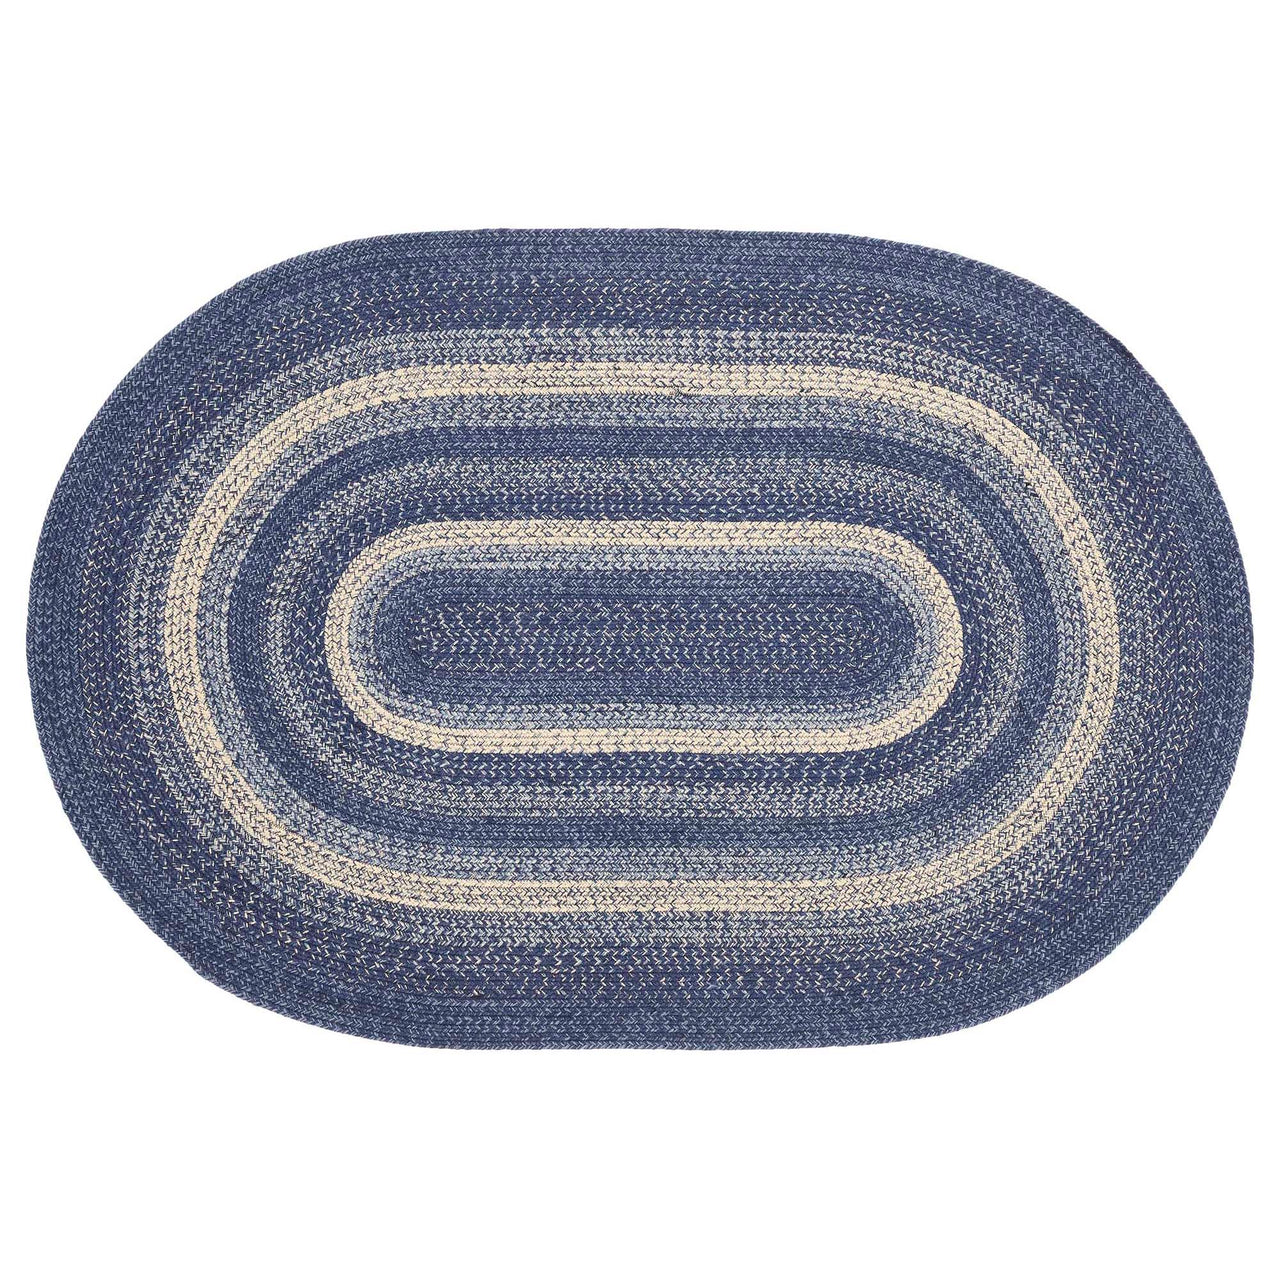 Great Falls Blue Jute Braided Rug Oval with Rug Pad 4'x6' VHC Brands